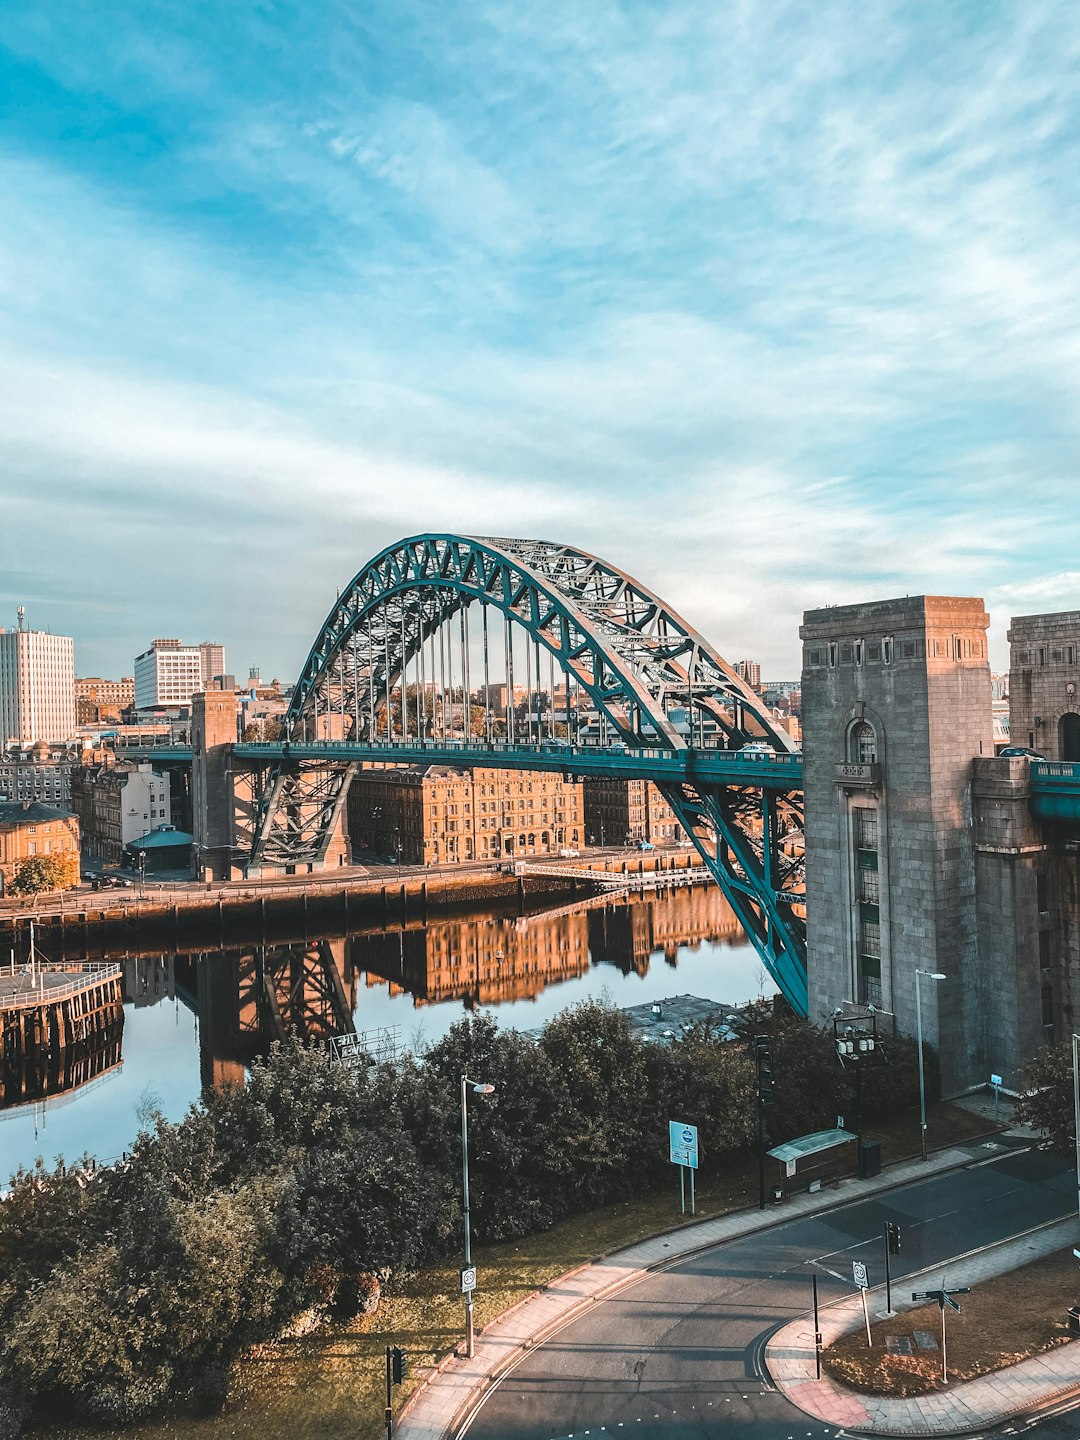 Travel Tips and Stories of Newcastle upon Tyne in United Kingdom